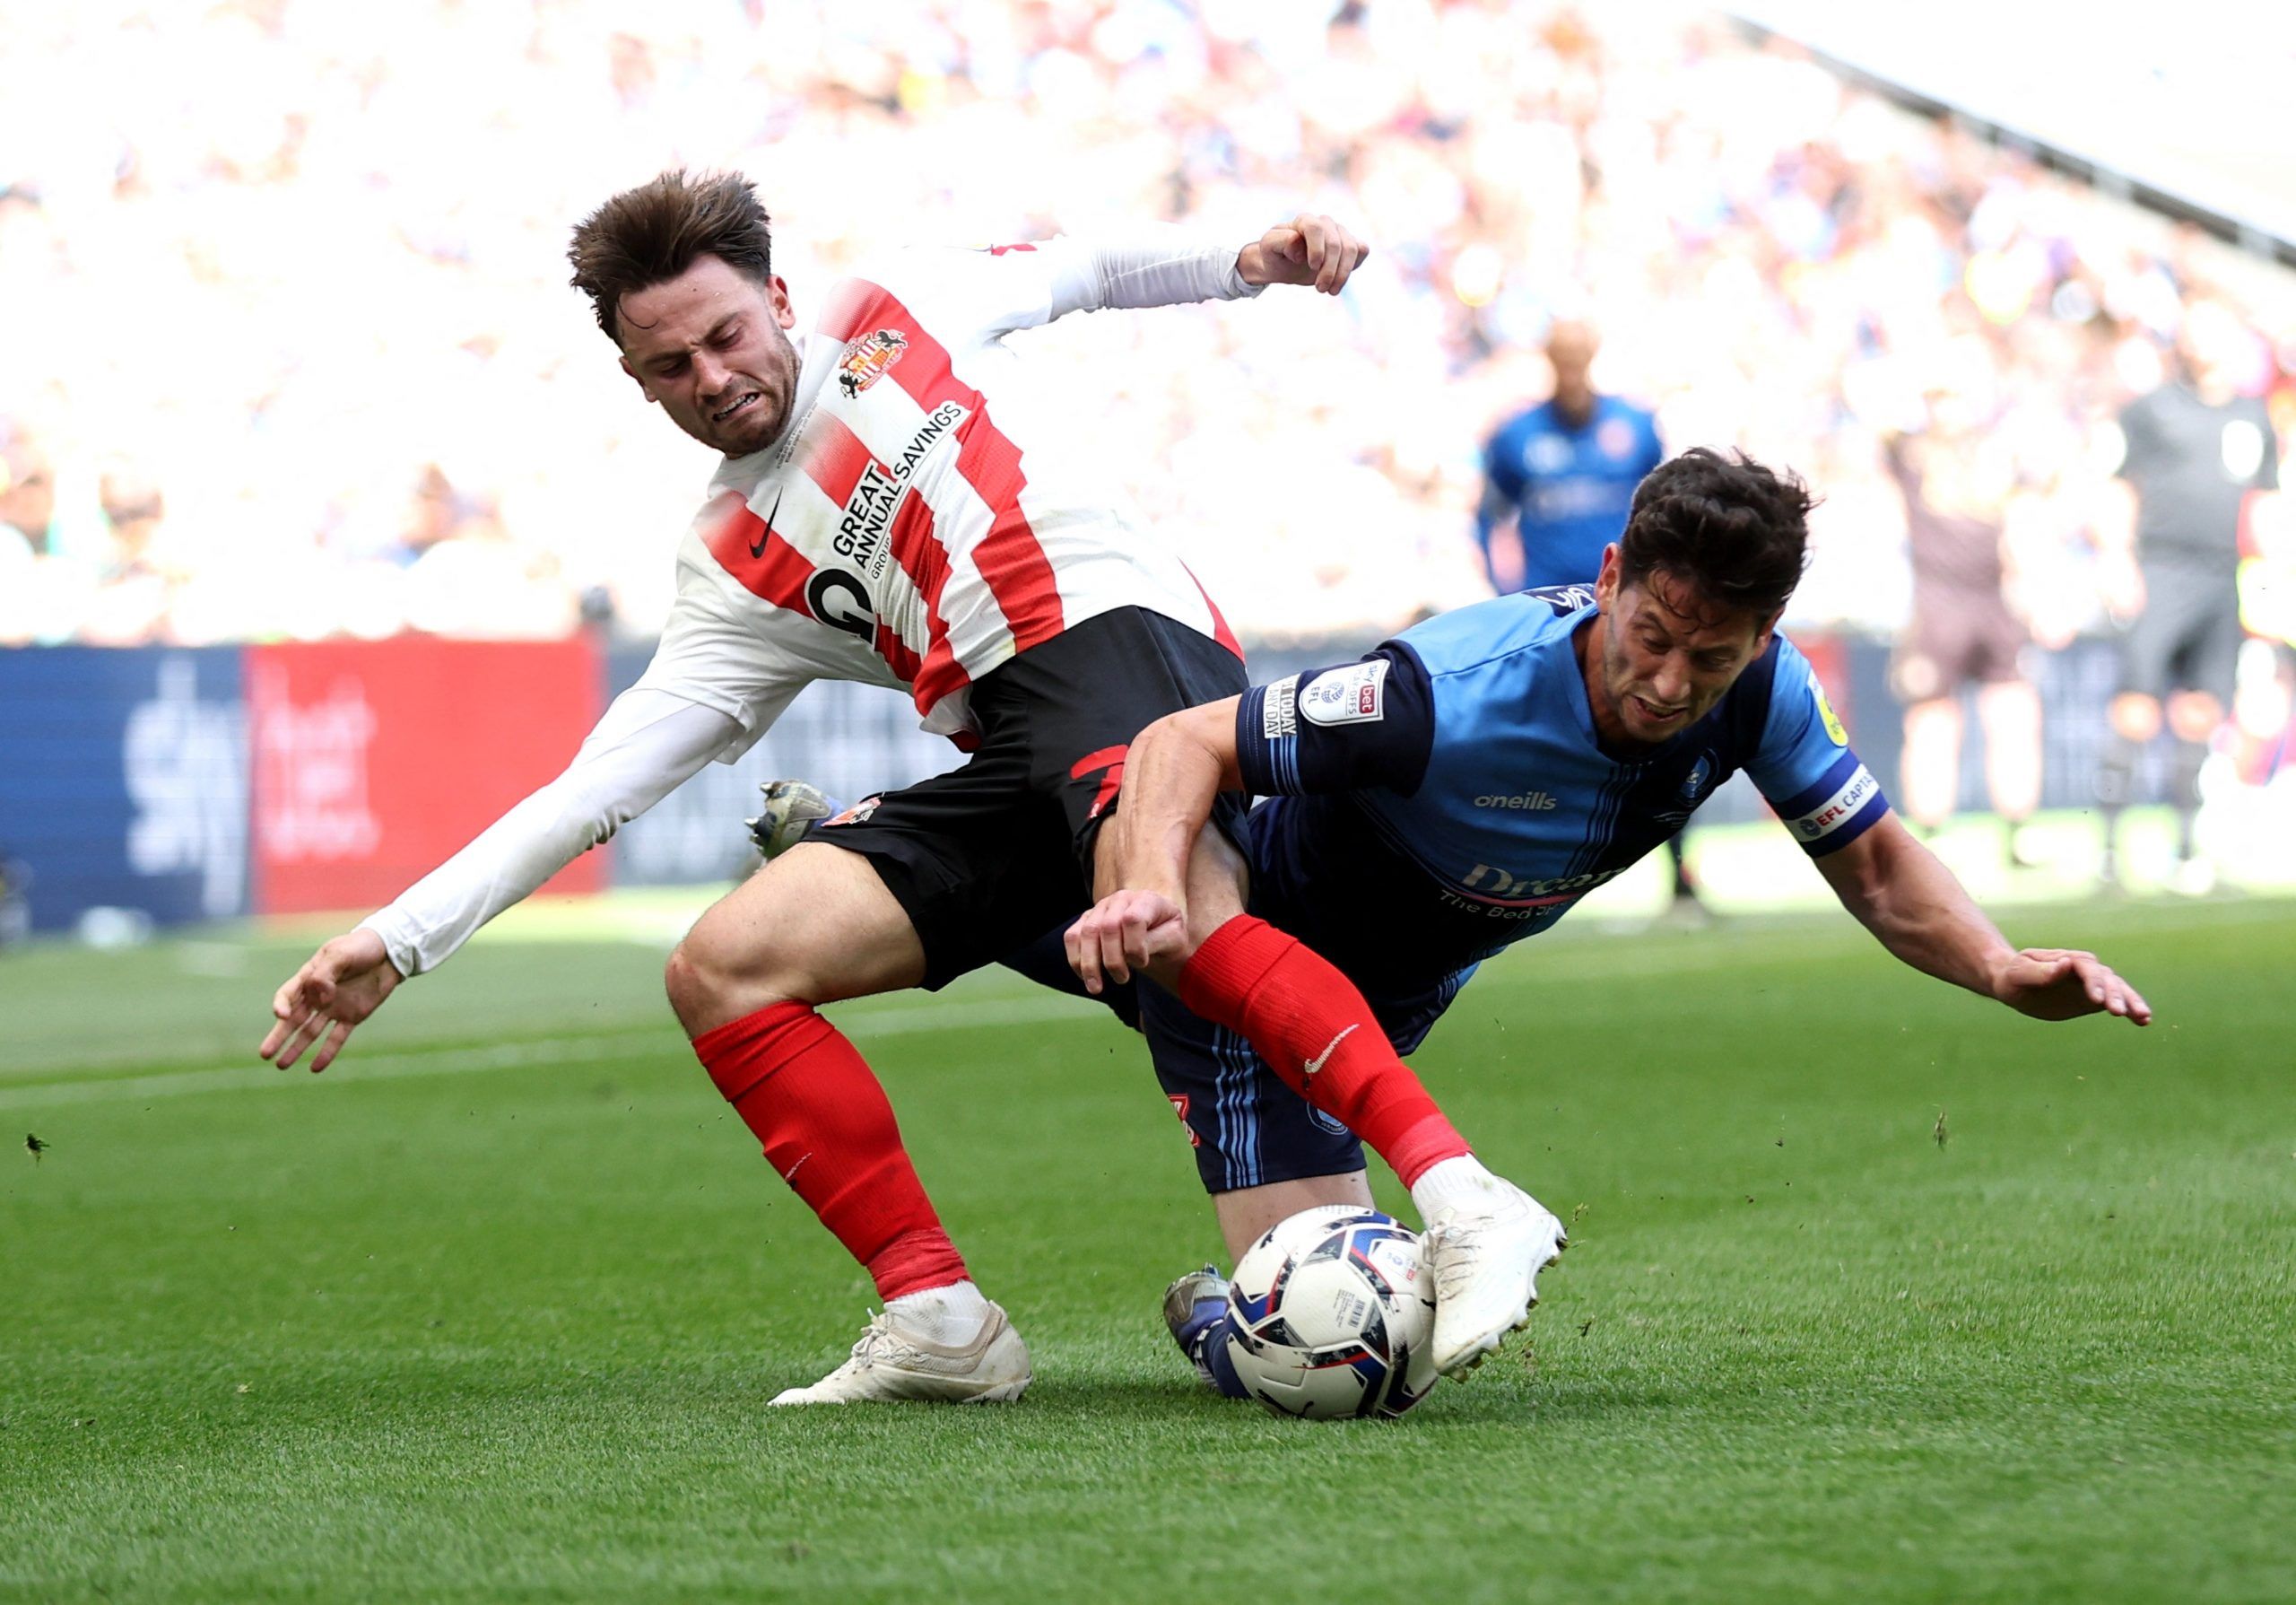 patrick-roberts-sunderland-alex-neil-league-one-championship-wycombe-Soccer Football - League One Play-Off Final - Sunderland v Wycombe Wanderers - Wembley Stadium, London, Britain - May 21, 2022  Sunderland's Patrick Roberts in action with Wycombe Wanderers' Joe Jacobson Action Images/Matthew Childs EDITORIAL USE ONLY. No use with unauthorized audio, video, data, fixture lists, club/league logos or 'live' services. Online in-match use limited to 75 images, no video emulation. No use in betting,